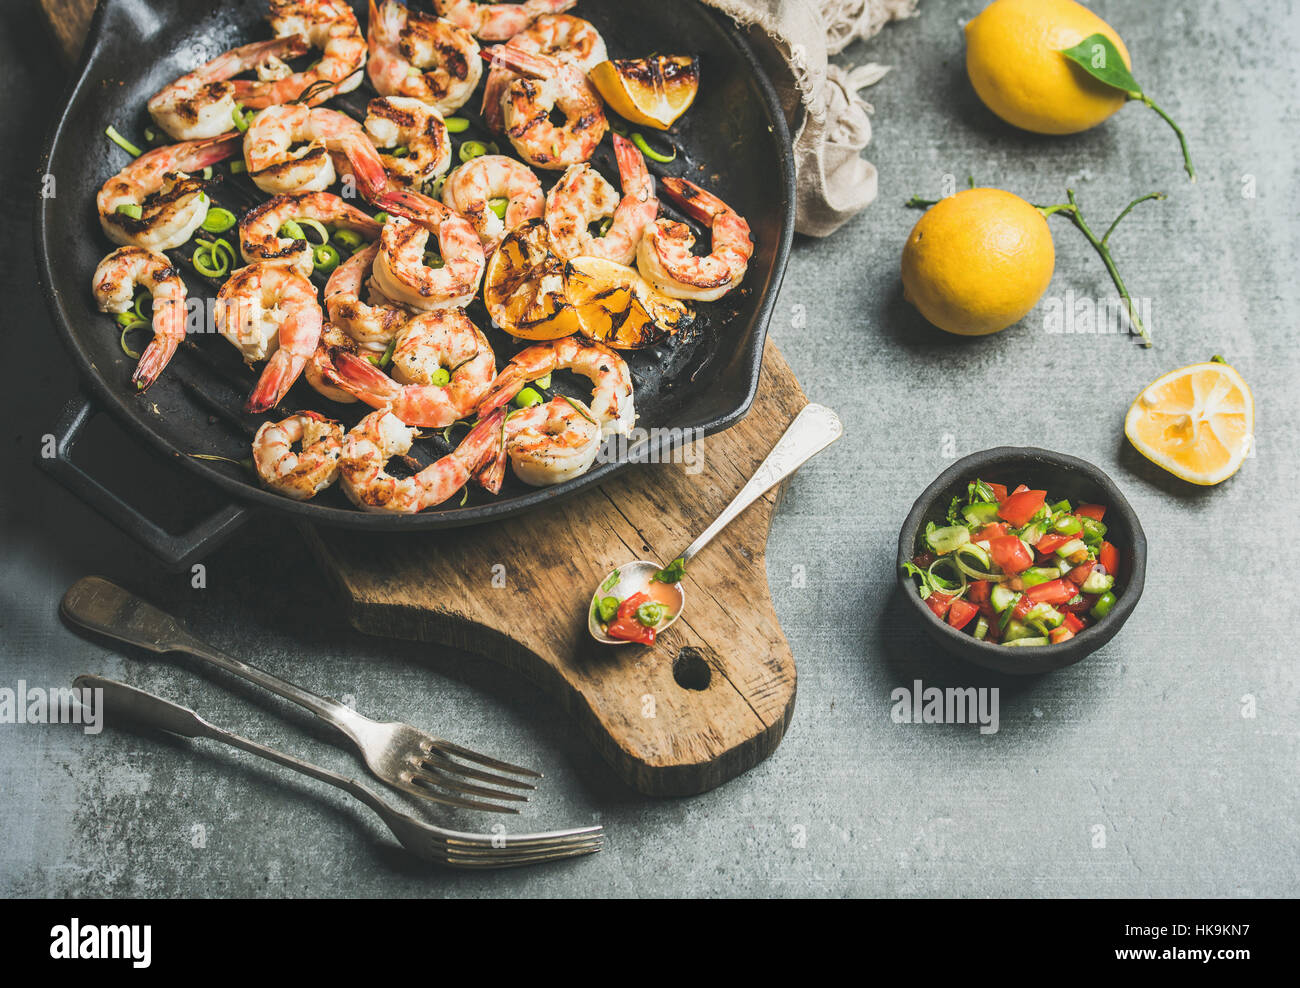 Seafood dinner. Grilled tiger prawns in cast iron grilling pan with lemon, leek, chili pepper and mint salsa sauce over grey concrete background, sele Stock Photo